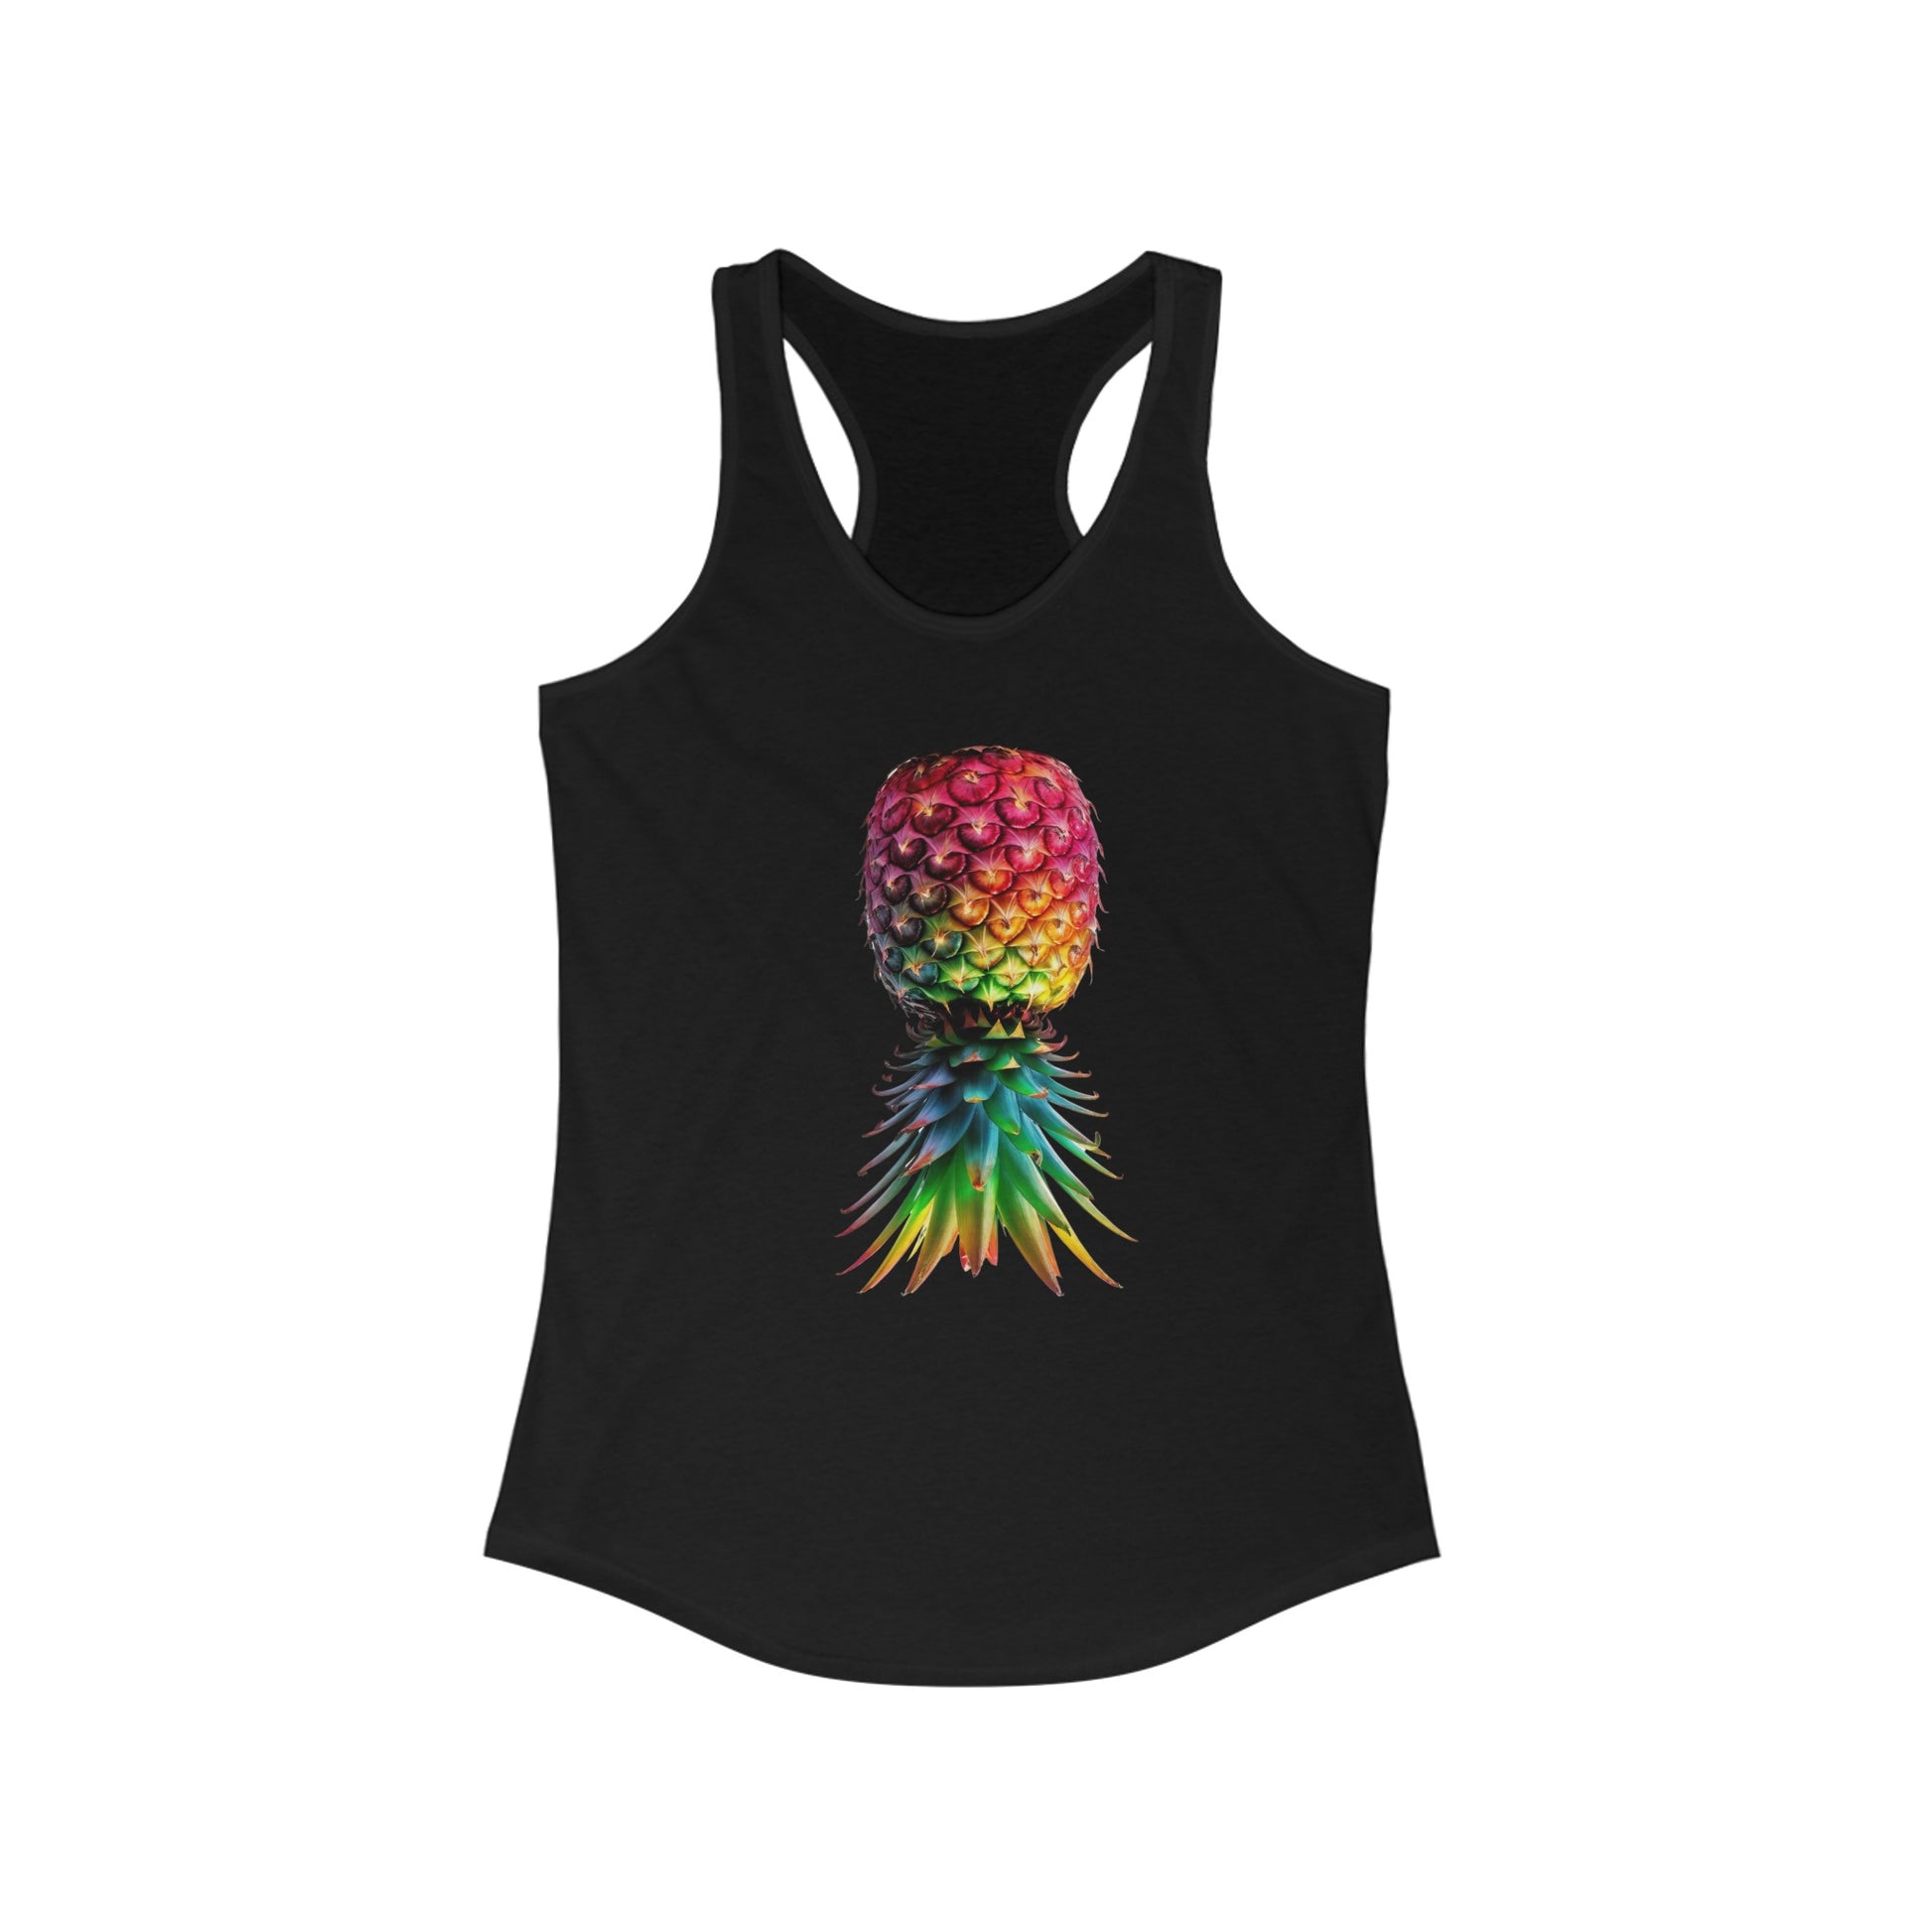 The Stamina for Men Women's Upside-down Pineapple black Top | QOS front view